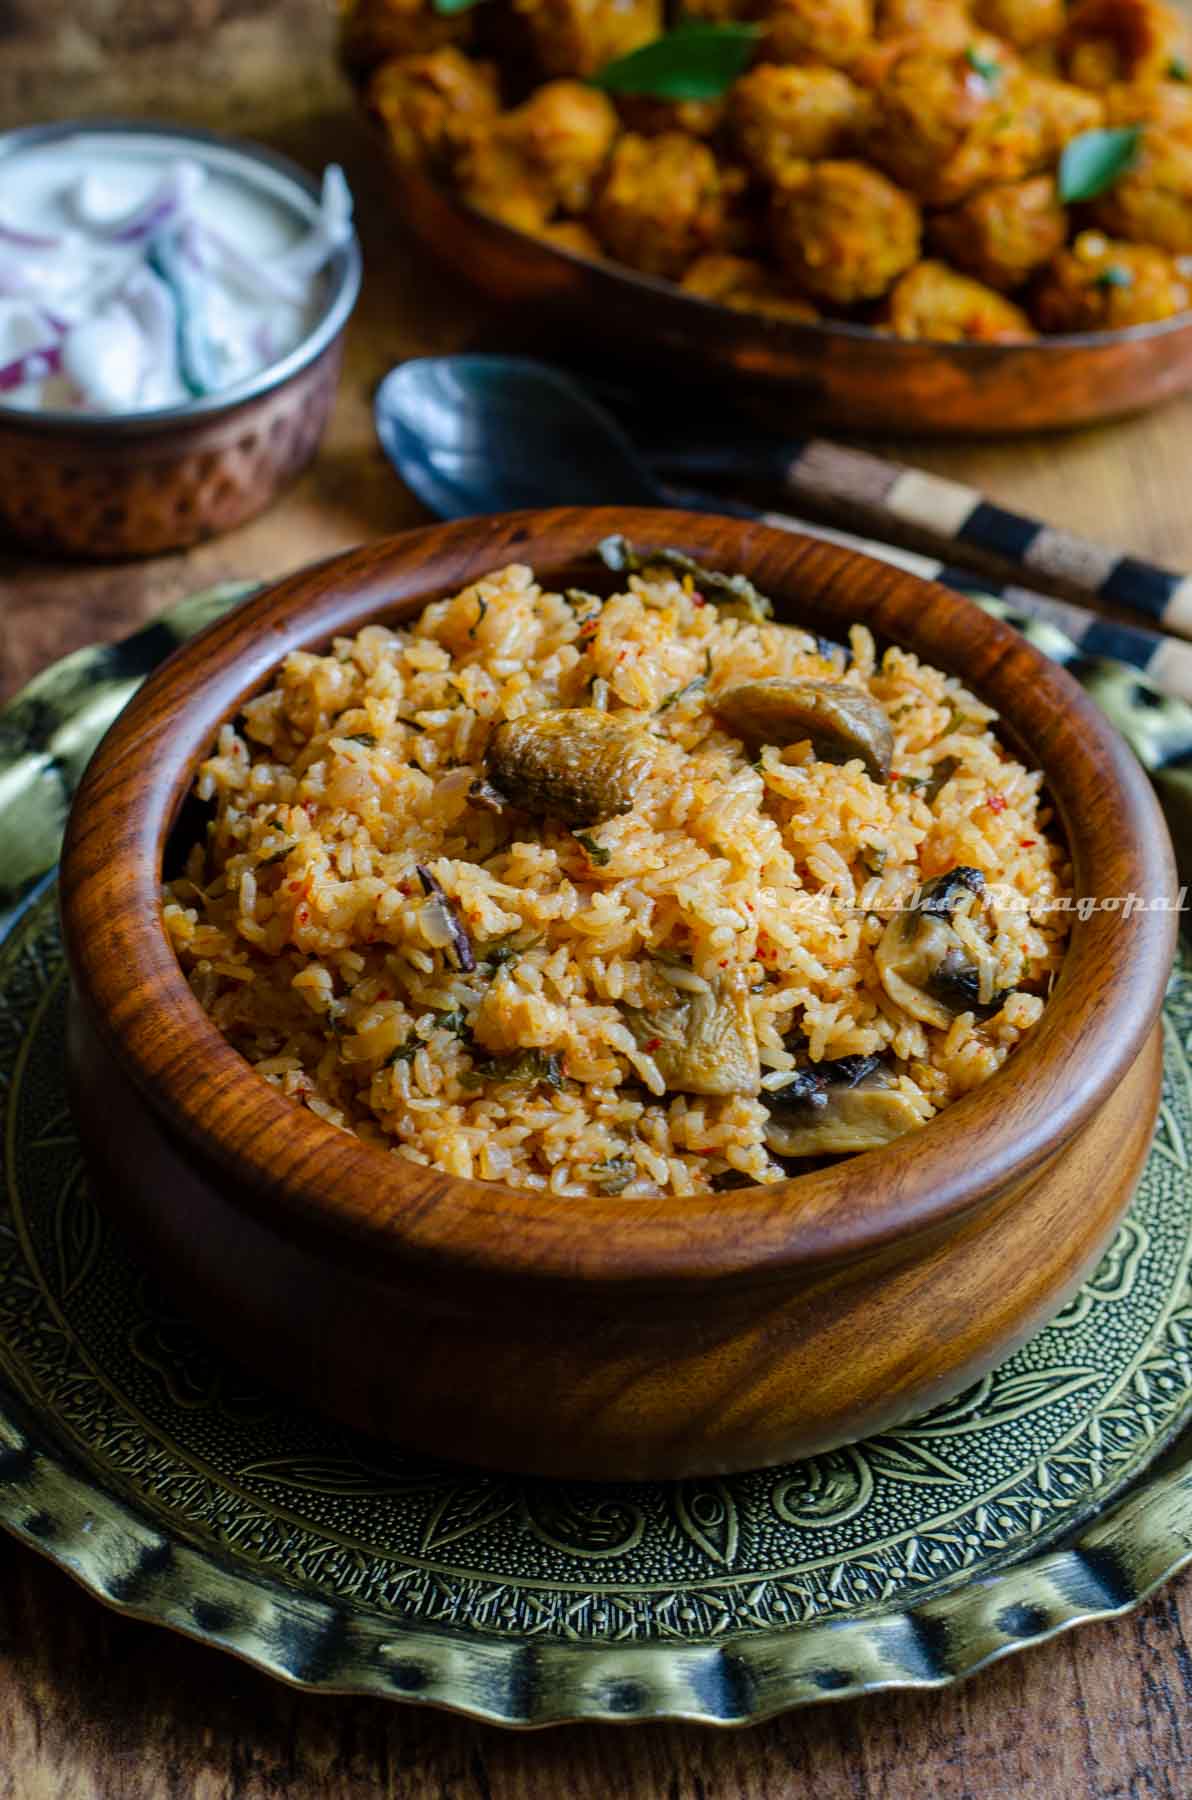 seeraga samba biryani served in a wooden bowl placed over a brass plate